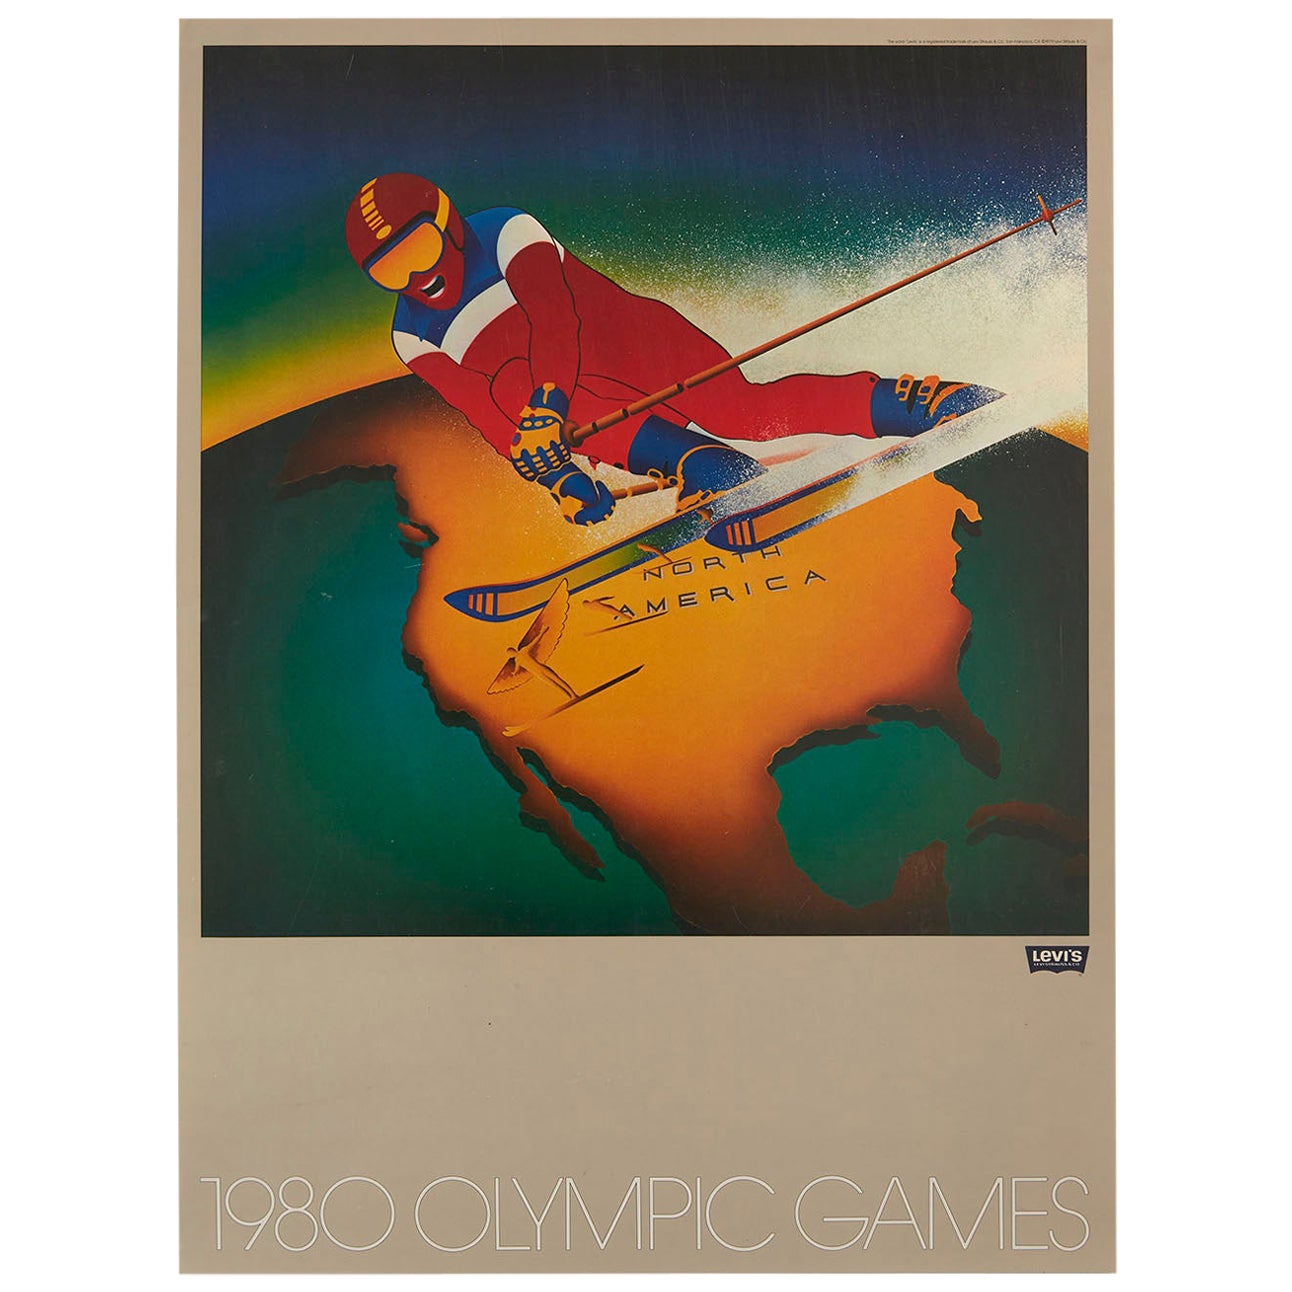 Original Vintage Sport Poster Levi's Moscow 1980 Olympic Games N. America Skiing For Sale